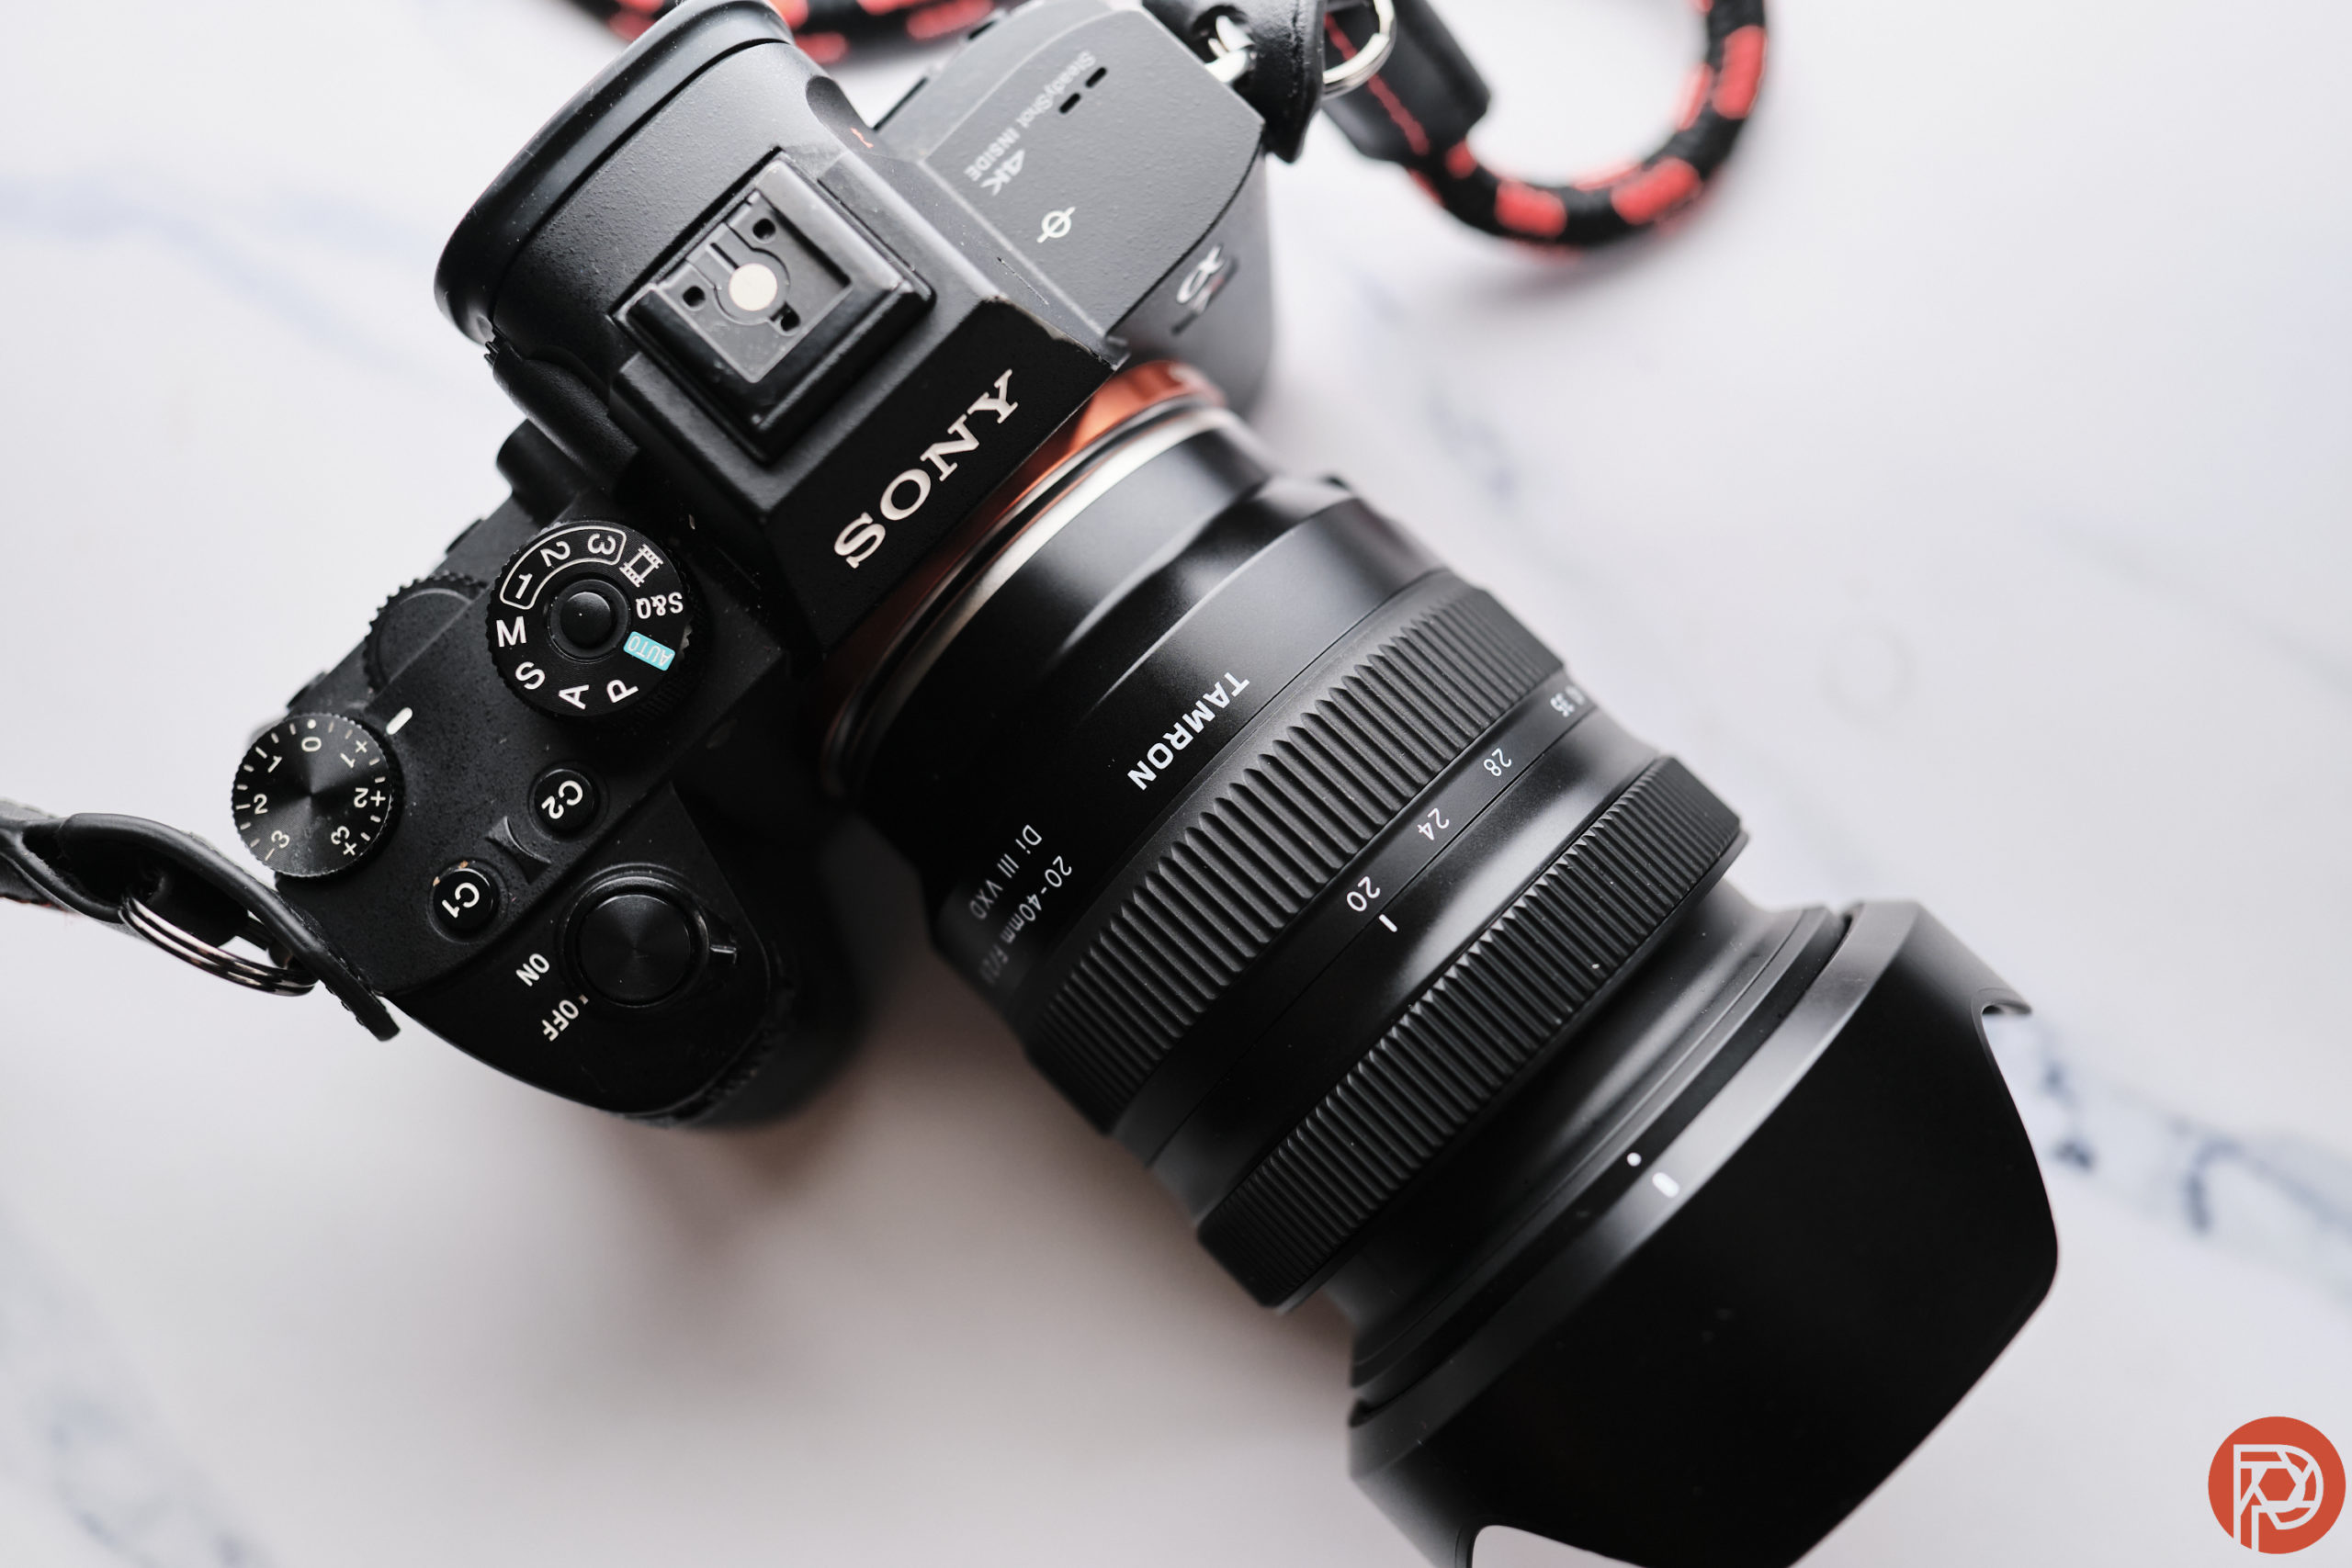 Chris Gampat The Phoblographer Tamron 20-40mm f2.8 product images review 21-320s400